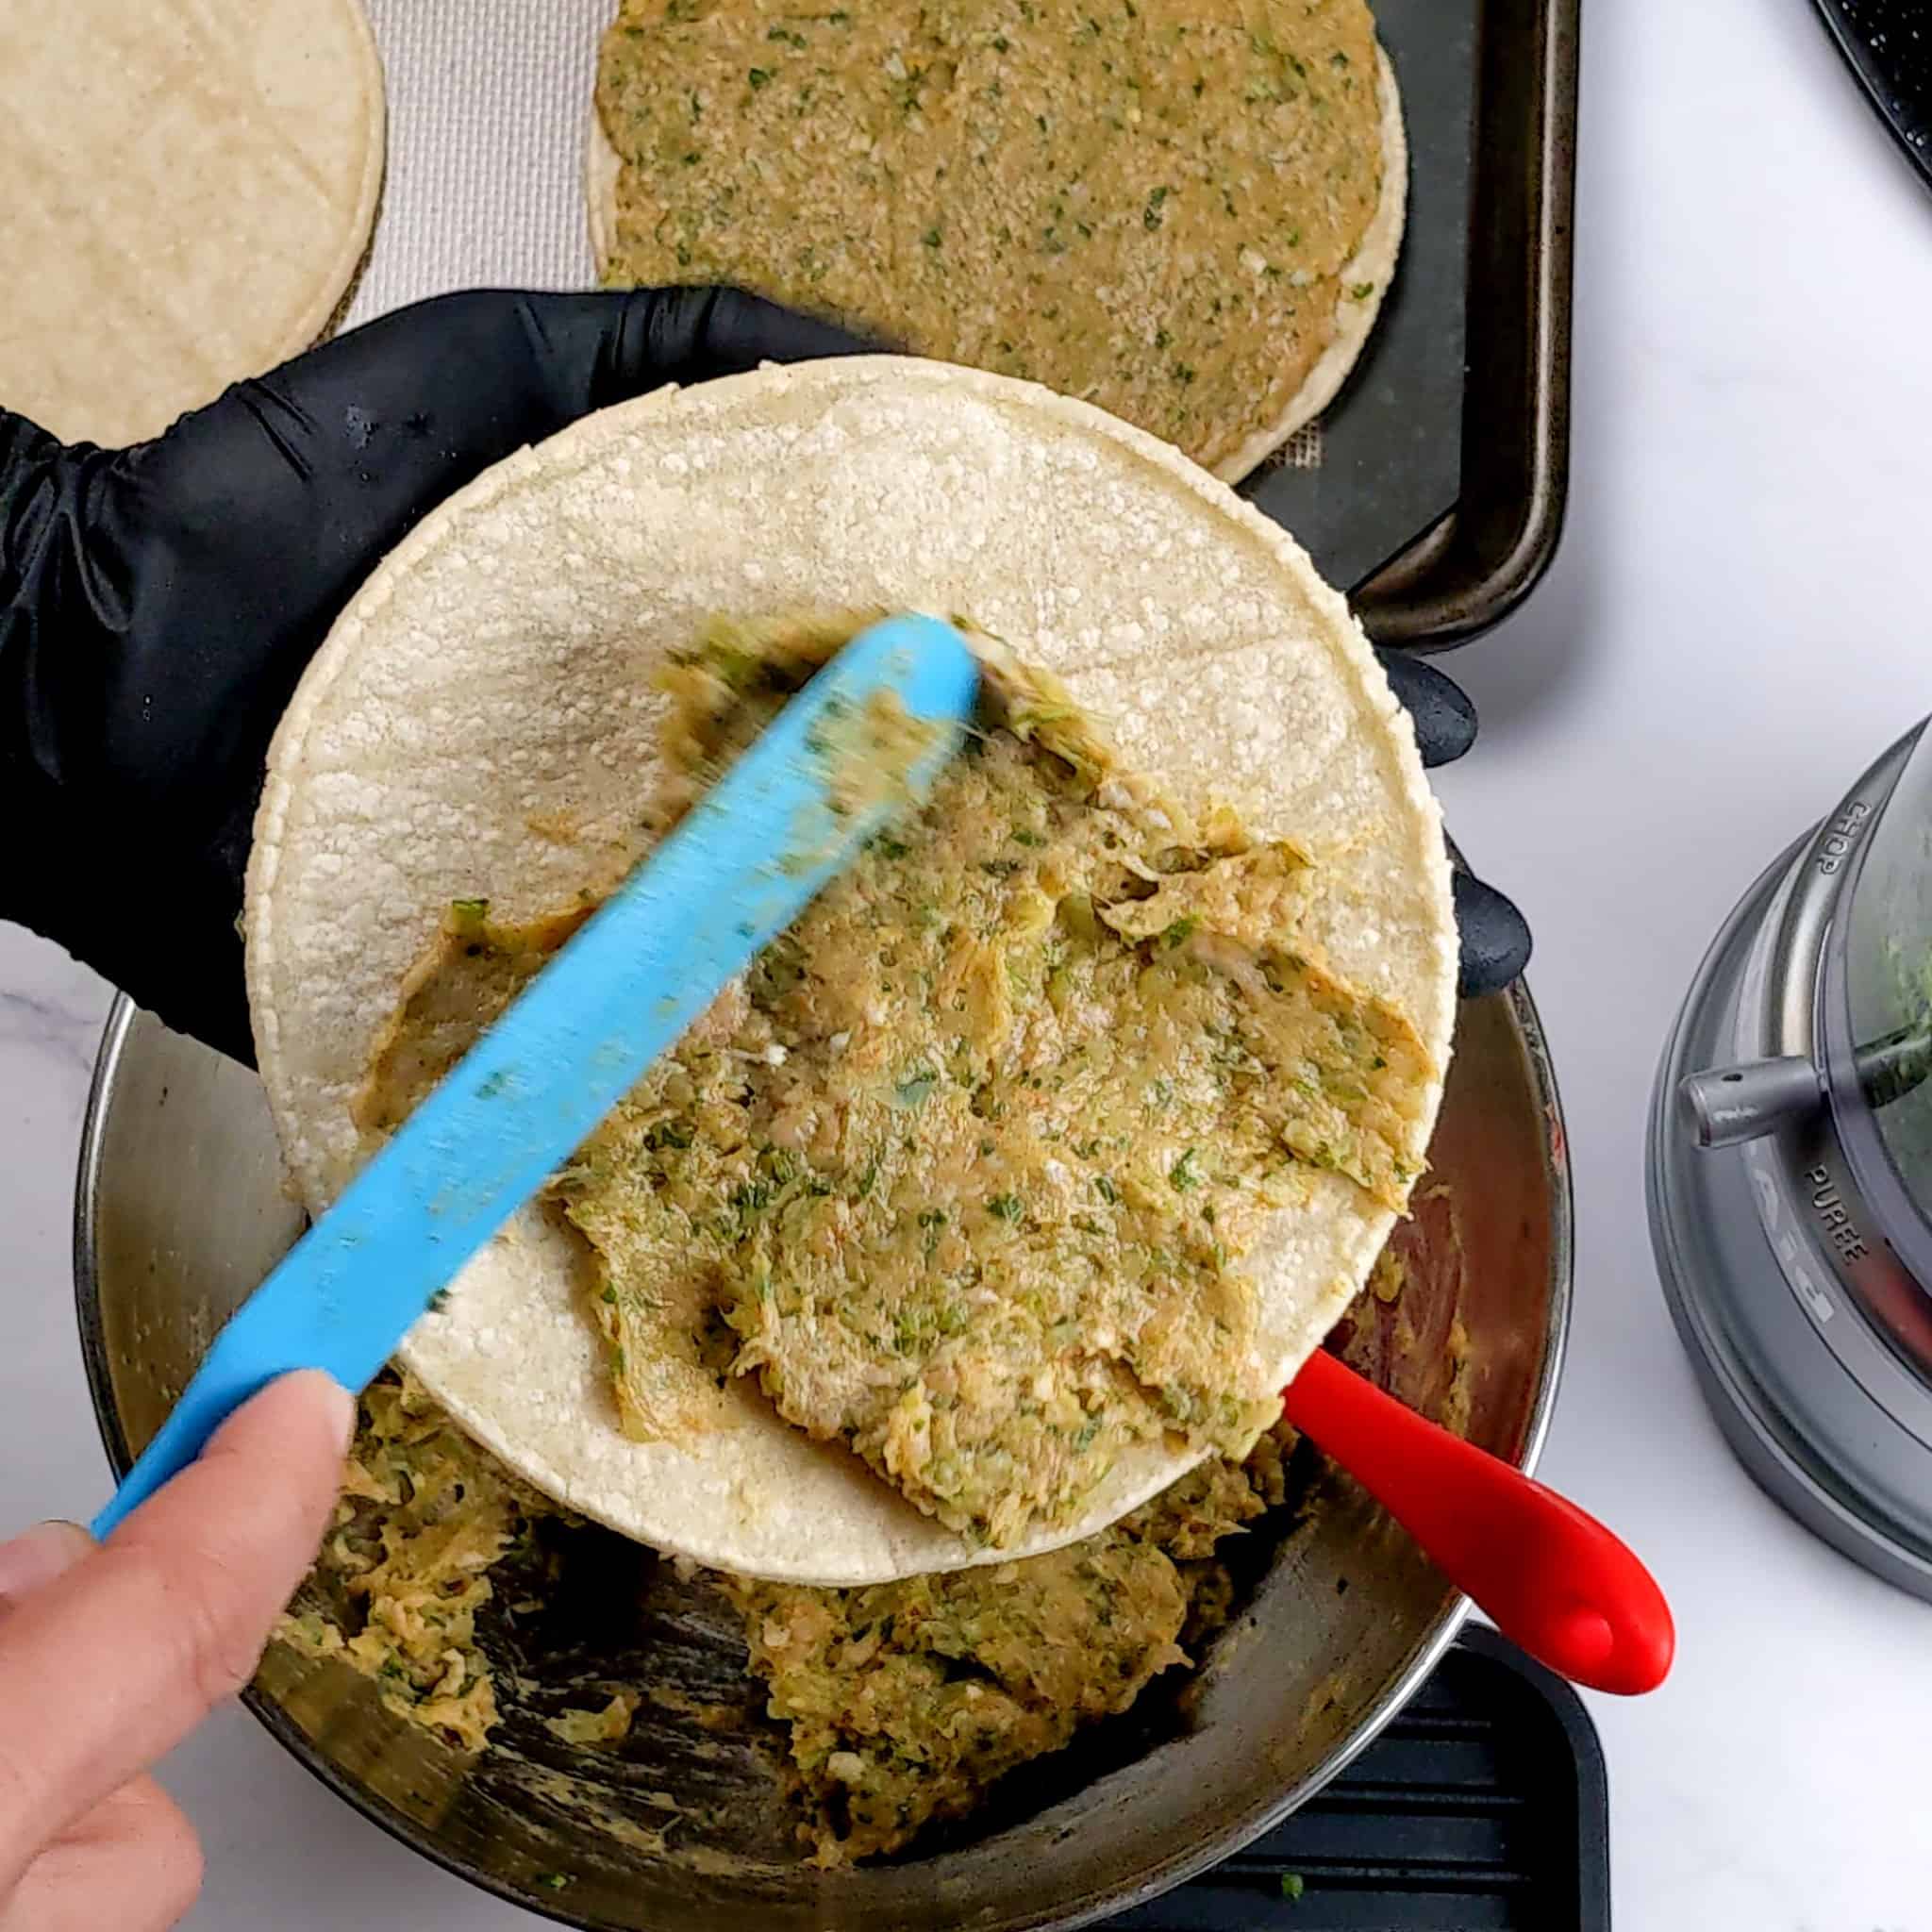 a long silicone spatula is being used to spread out the taco meat mixture onto a corn tortilla being held in a gloved hand.